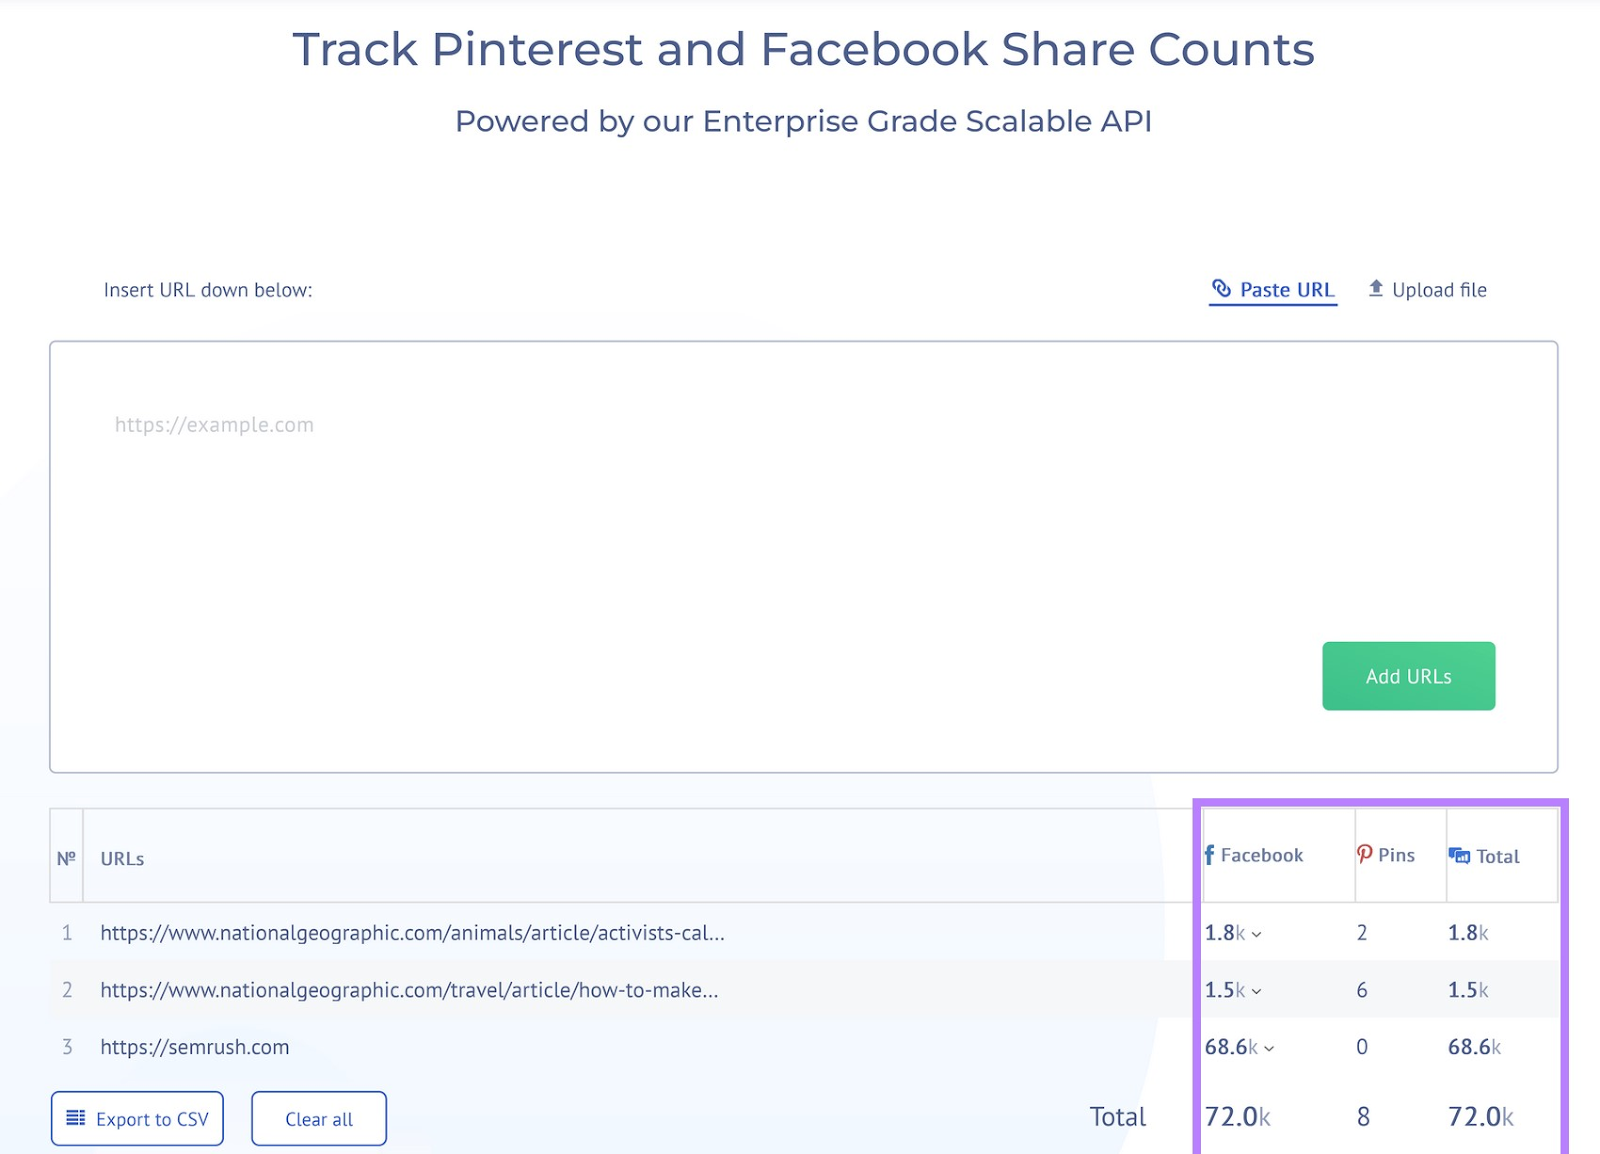 SharedCount "Track Pinterest and Facebook Share Counts" page